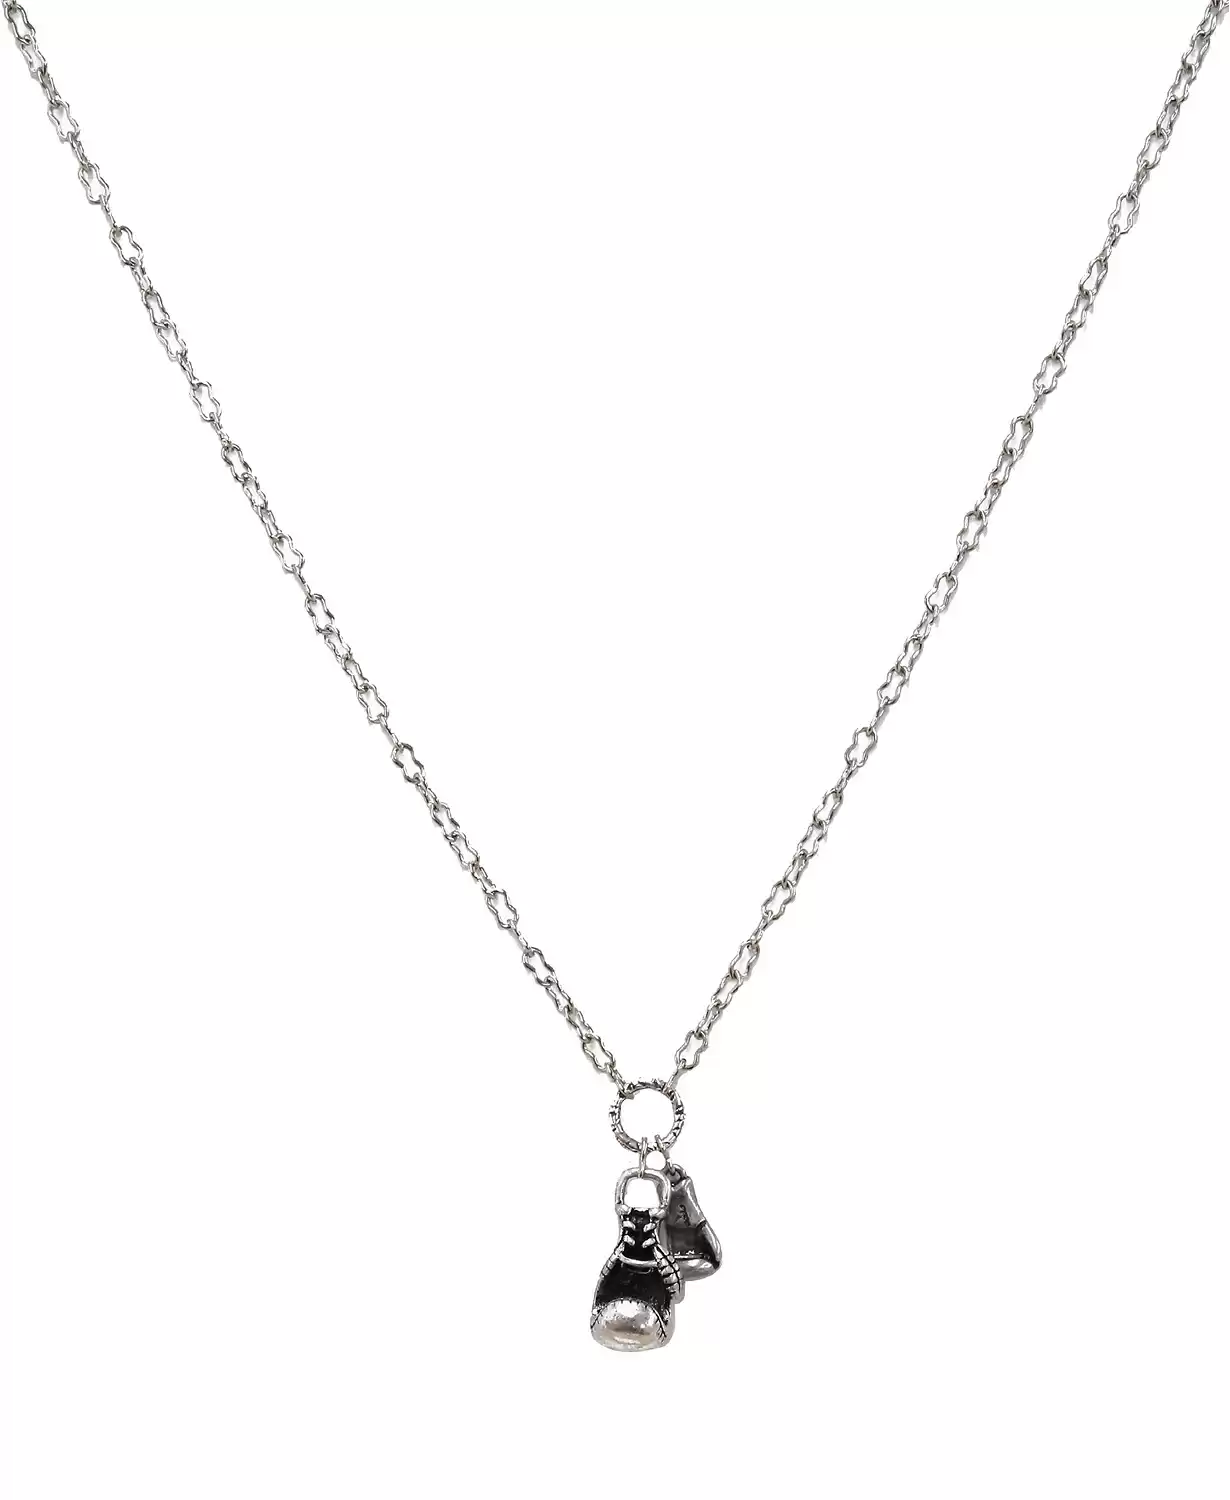 Mr. Ettika Ox Chain Necklace with Boxing Glove Charm